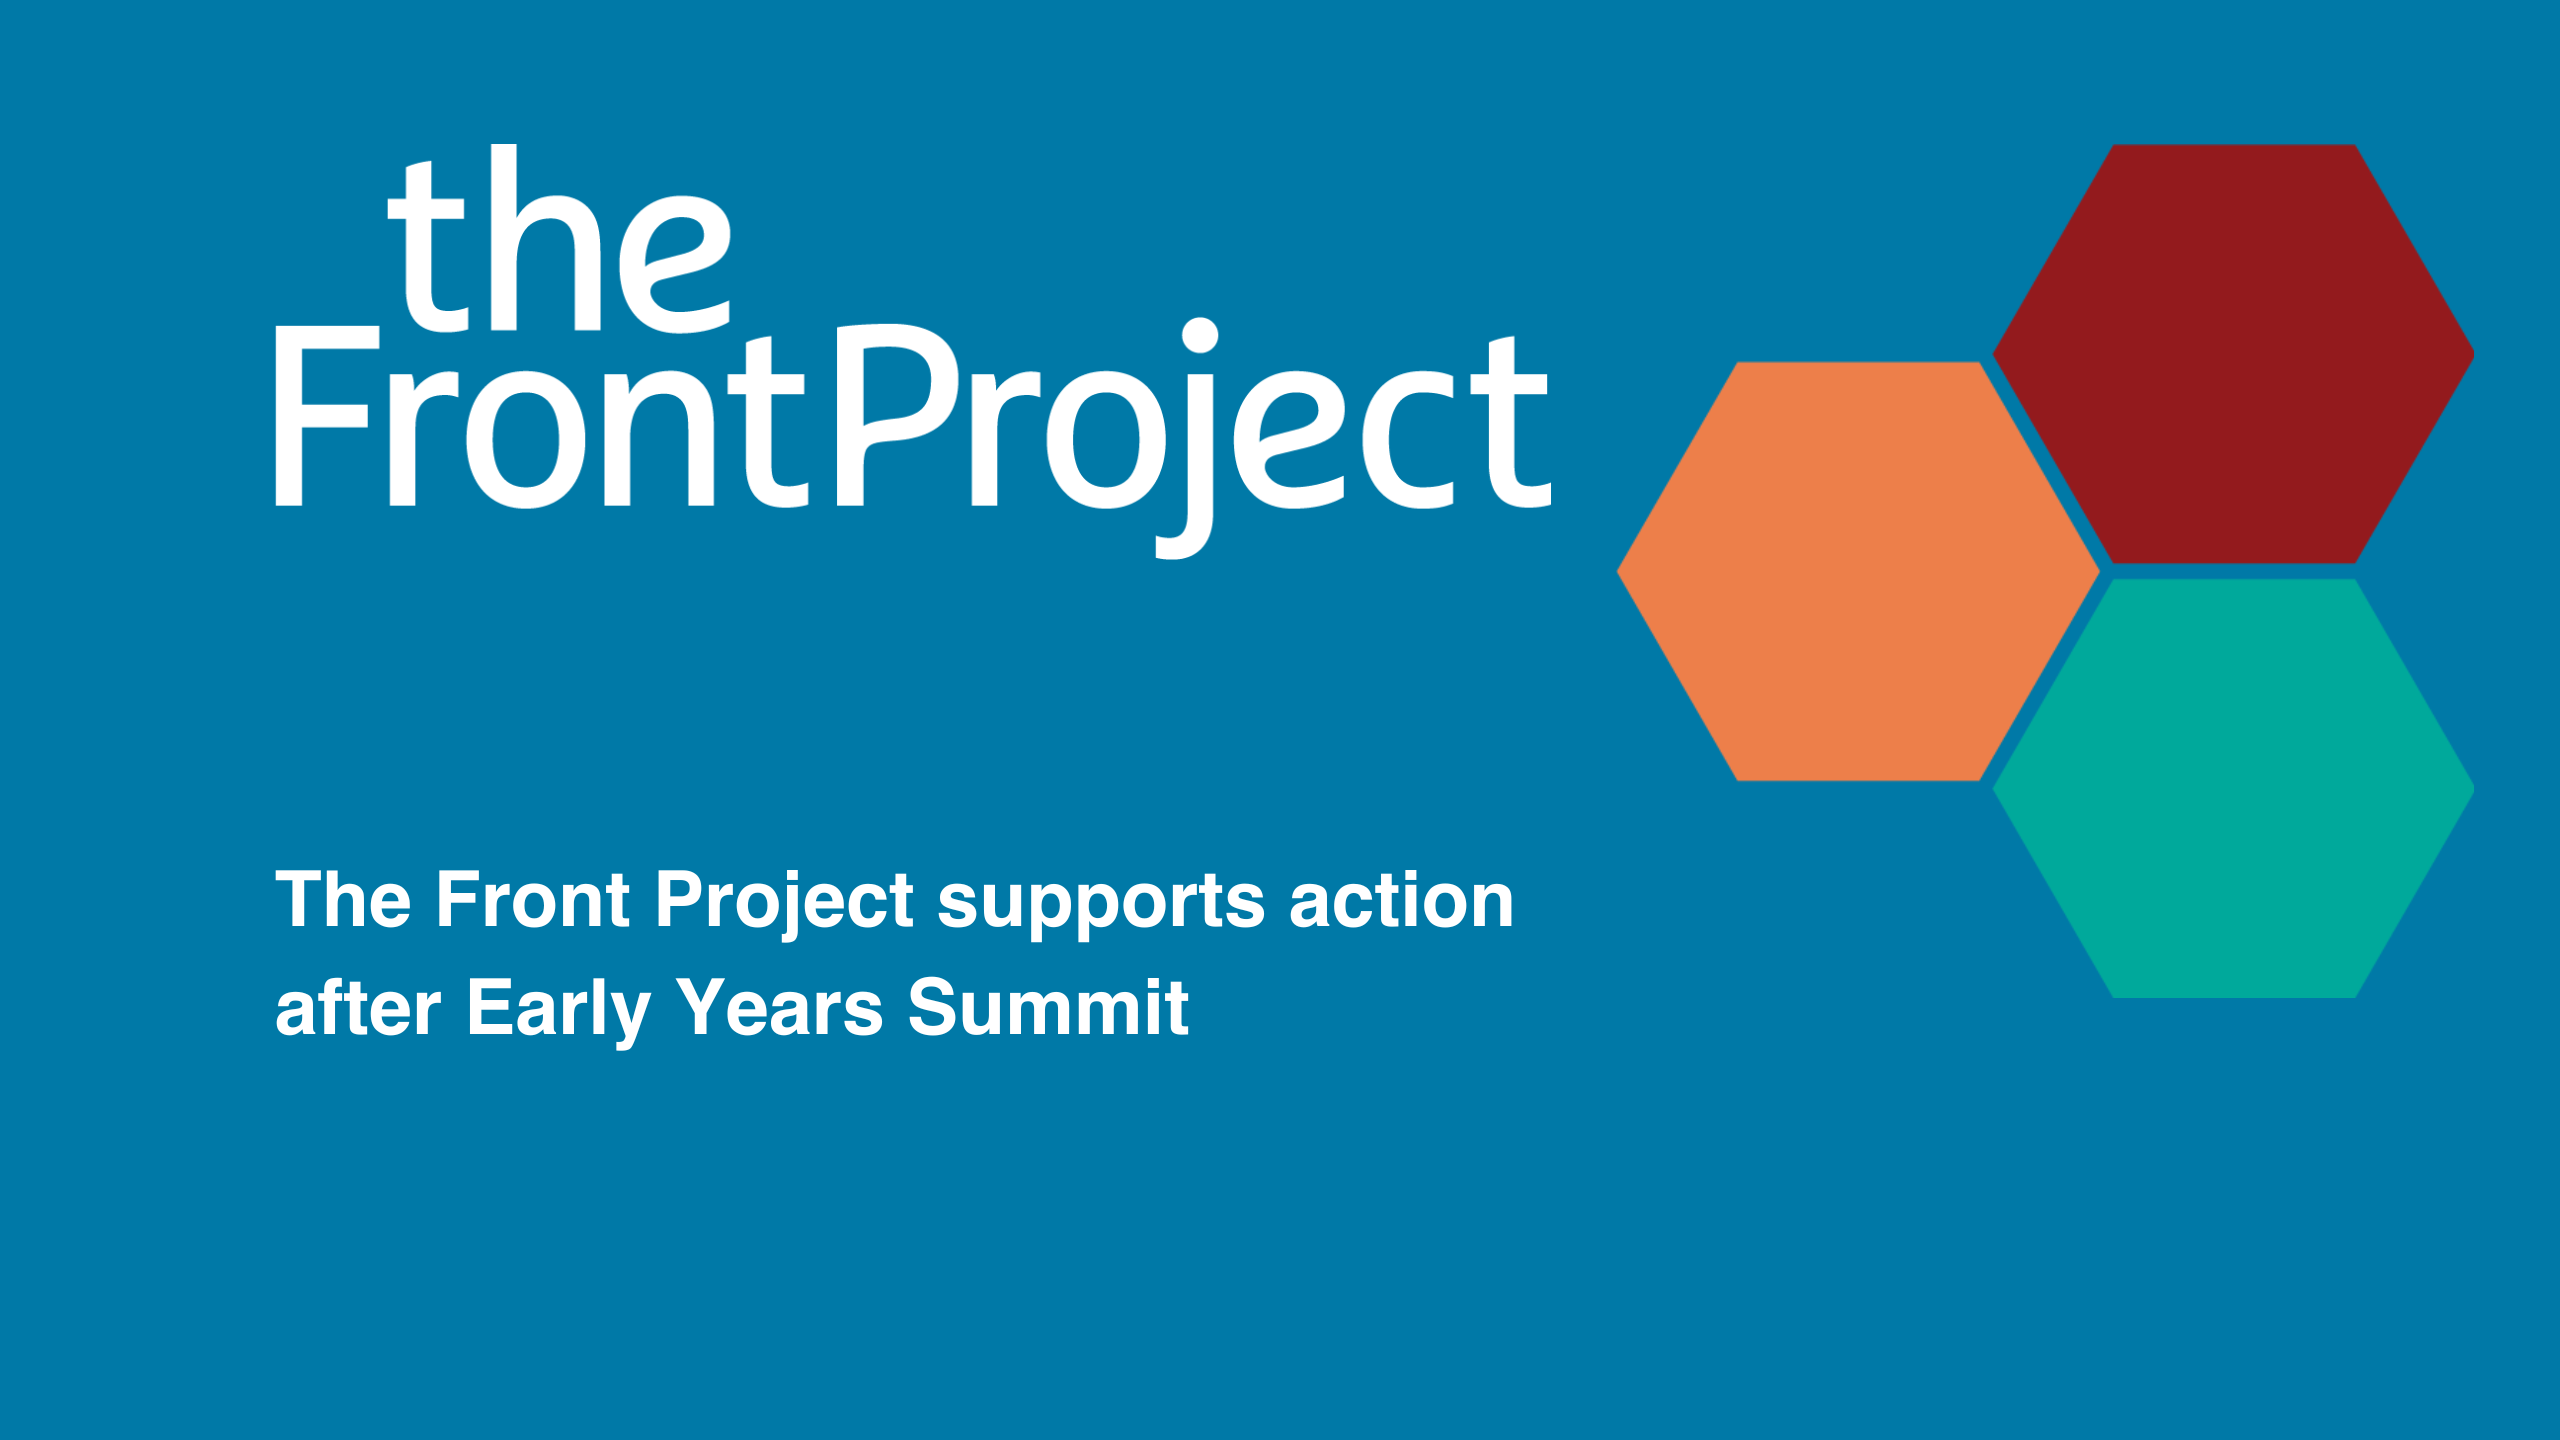 The Front Project supports action after Early Years Summit